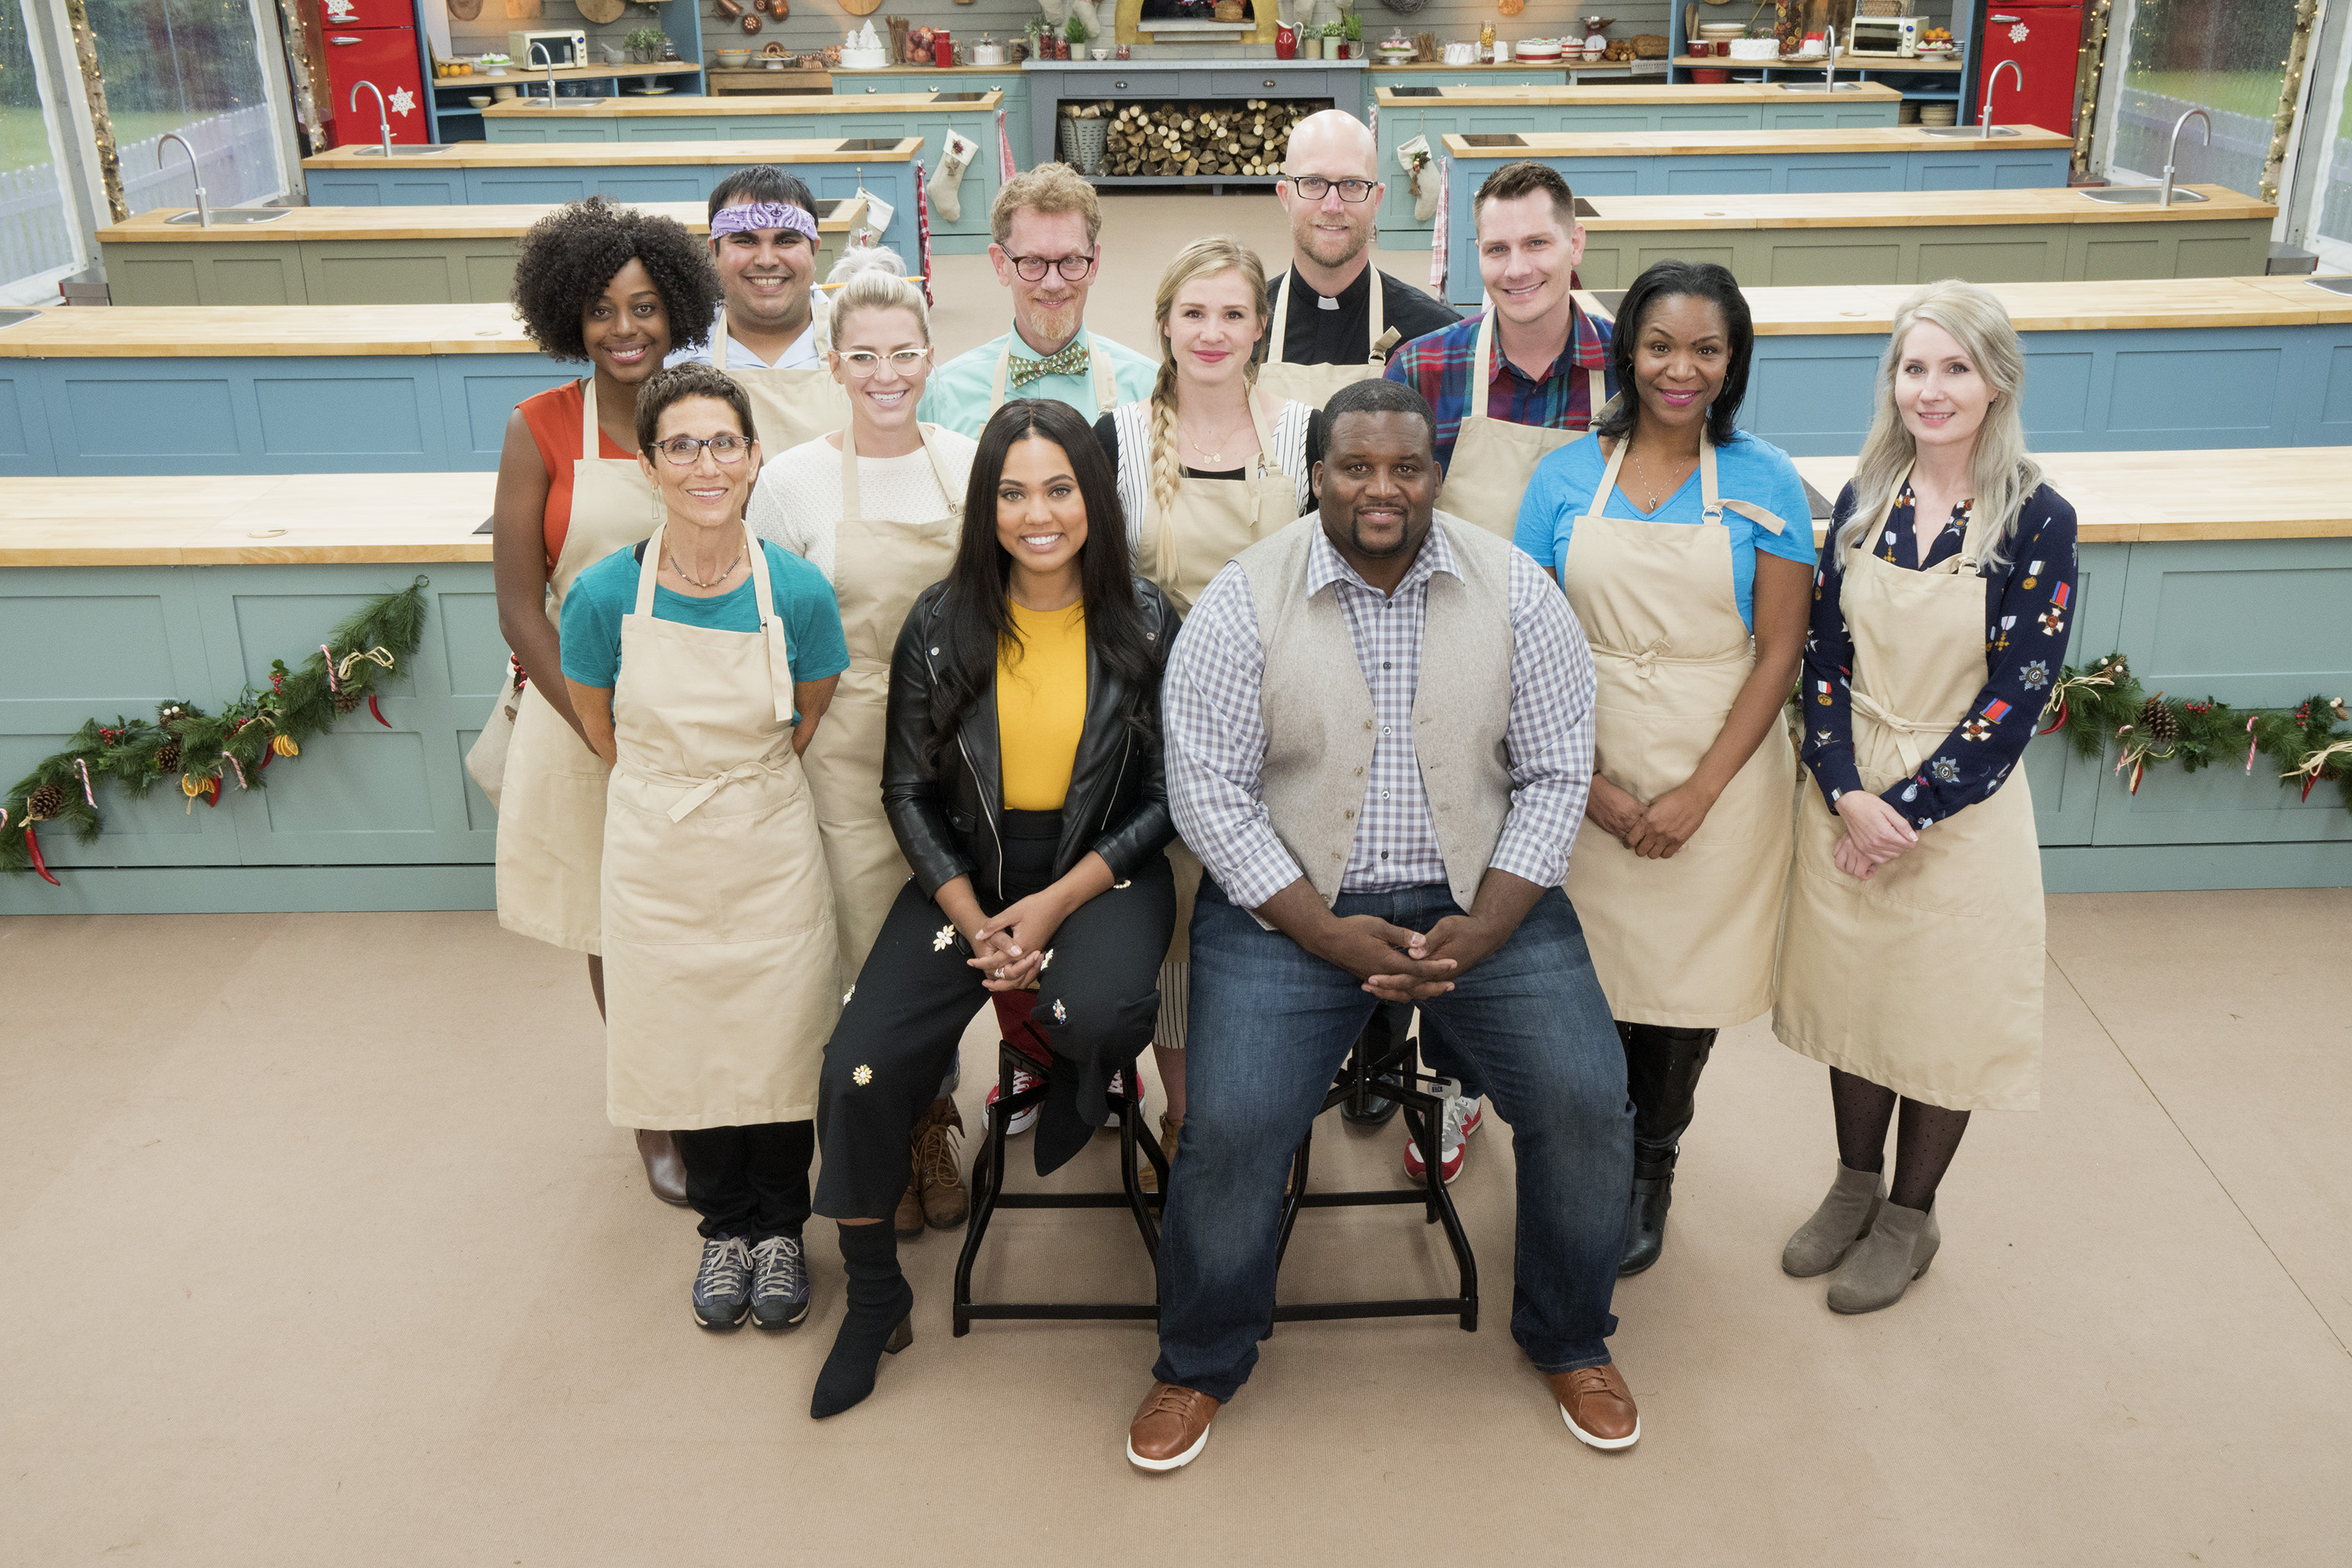 We Spoke to the Winner of the 'Great American Baking Show' that Never